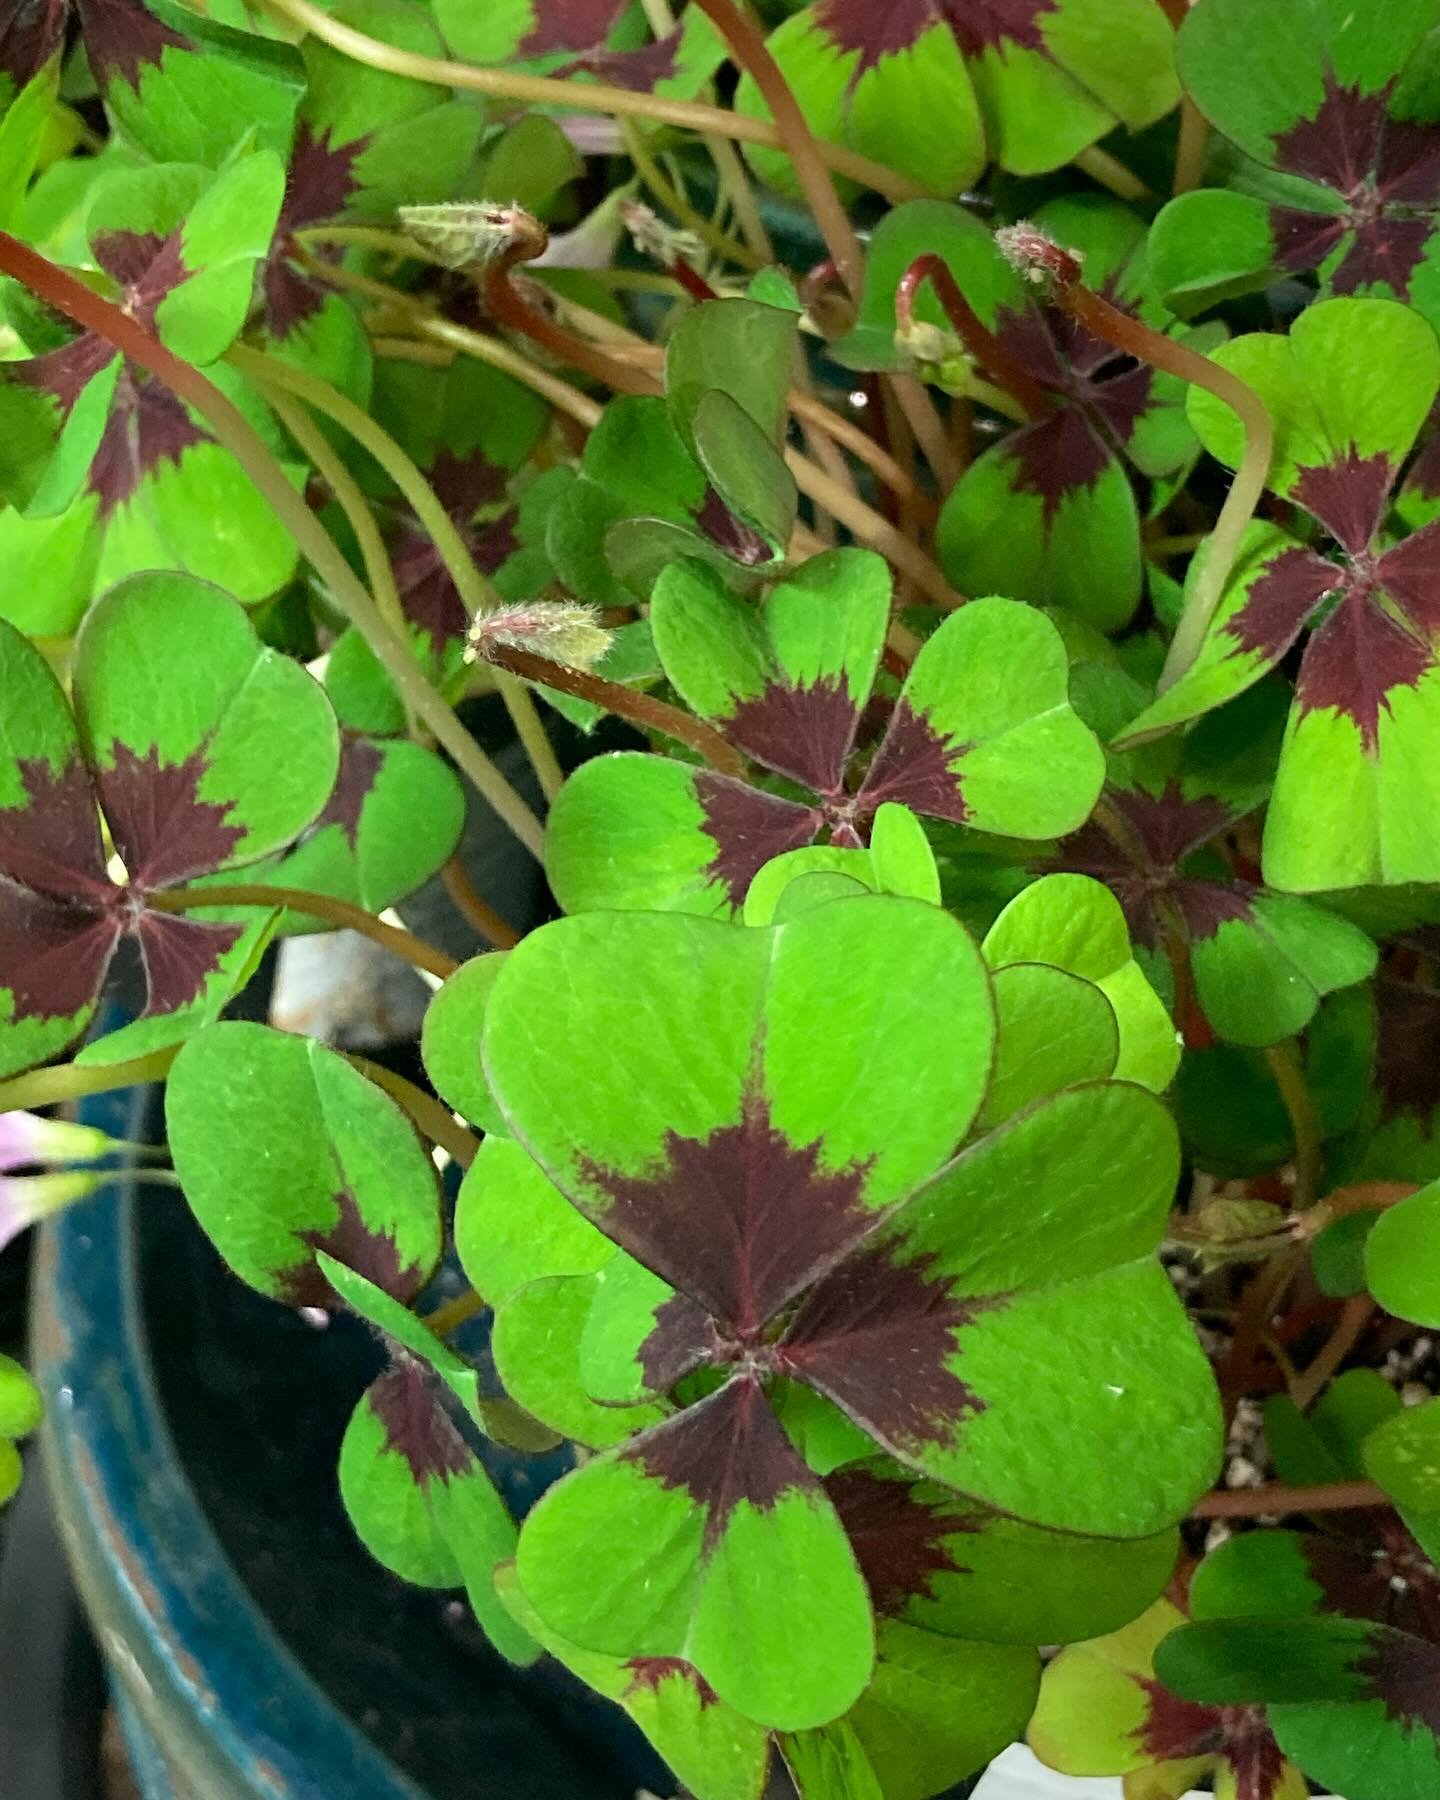 Spring is the time for two of our favorite plants, Oxalis and Spring Cactus, and we just got a great shipment of both!  Oxalis form Shamrock shaped leaves, bloom readily and love being out in the sun. We currently have three varieties (Lavender, Iron